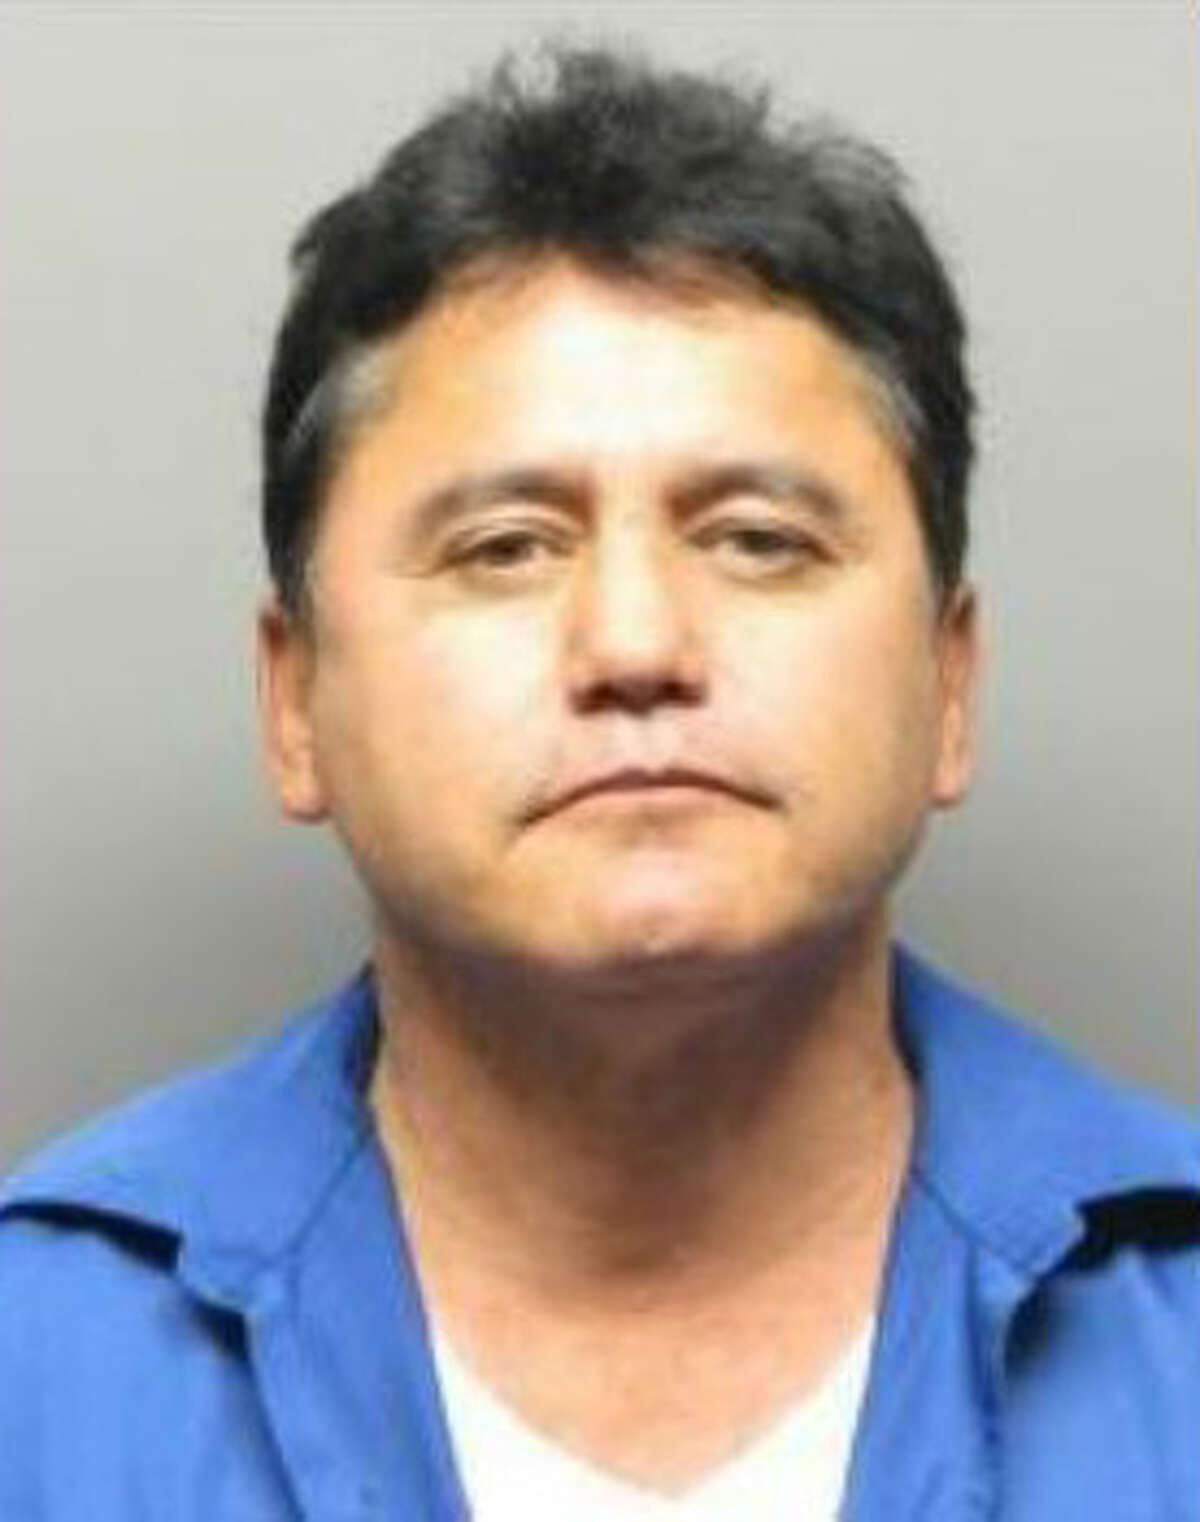 Dominic Salazar, 54, was arrested on suspicion of trafficking women out of a Pleasant Hill residence.